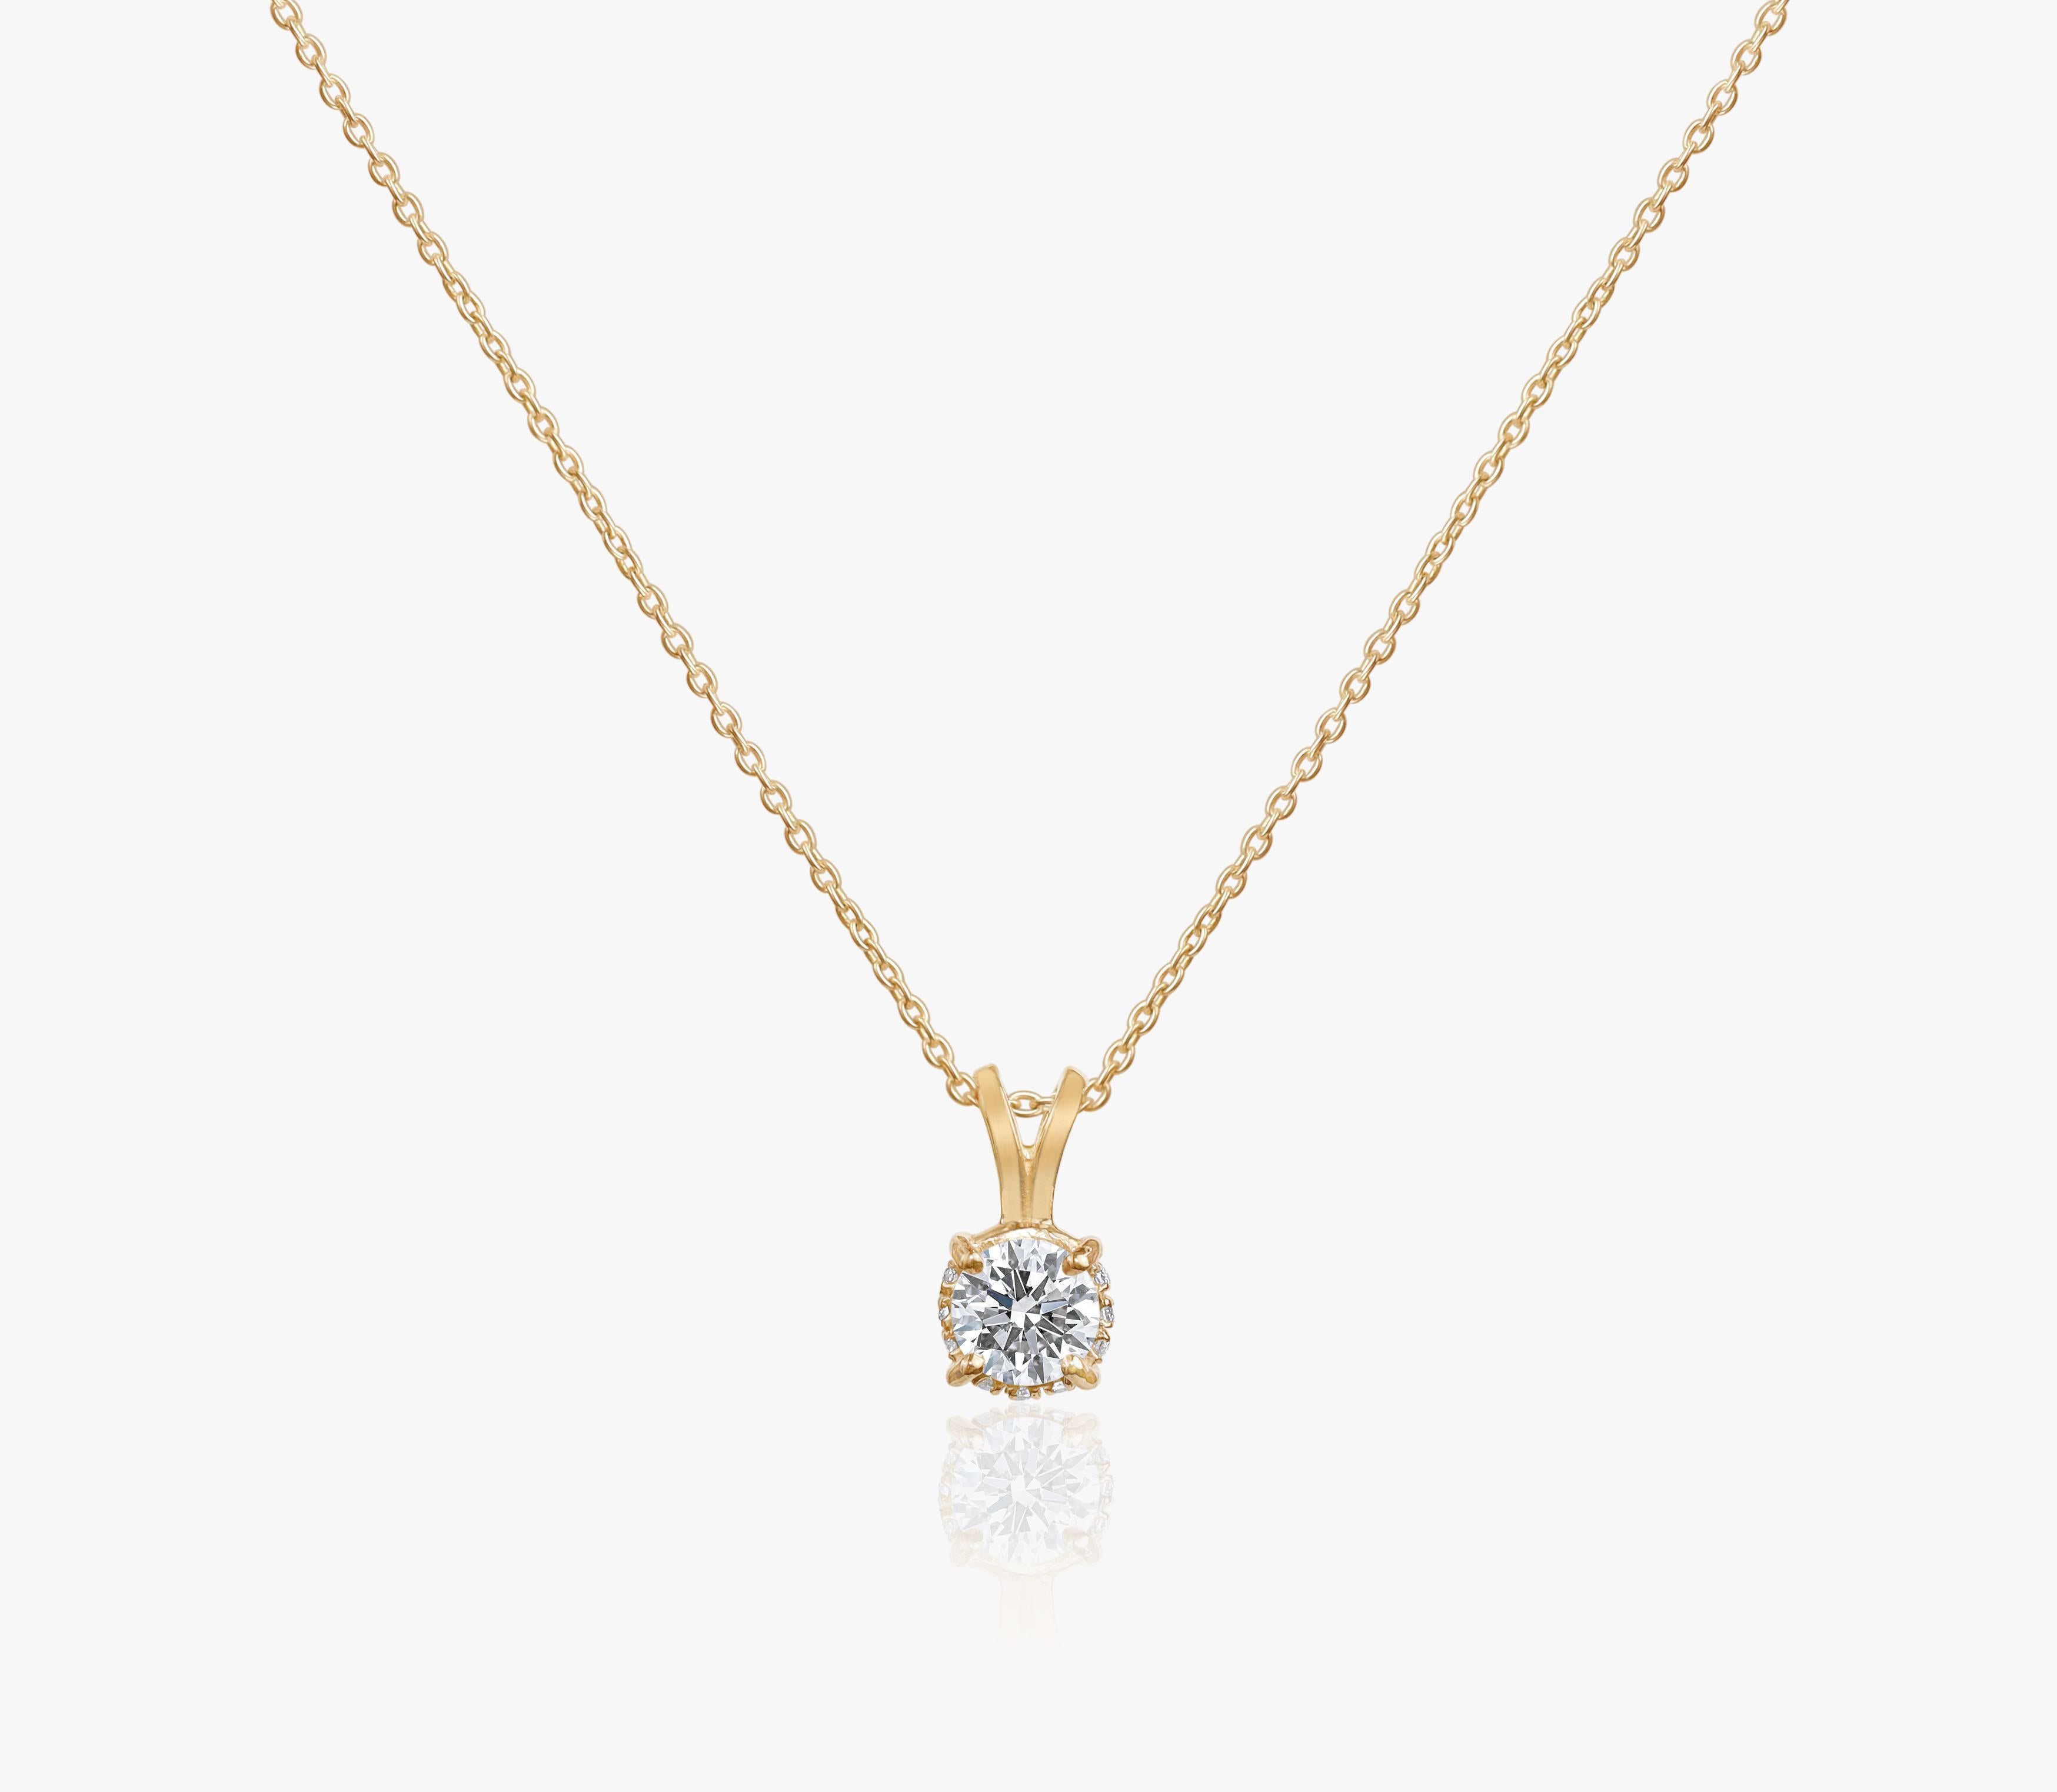 GIA Report Certified 2 Carat G VS Round Cut Diamond Hidden Halo Pendant / Necklace, Gift for her 

Available in 18k Yellow gold.

Same design can be made also with other custom gemstones per request.

Product details:

- Solid gold

- Main stone -